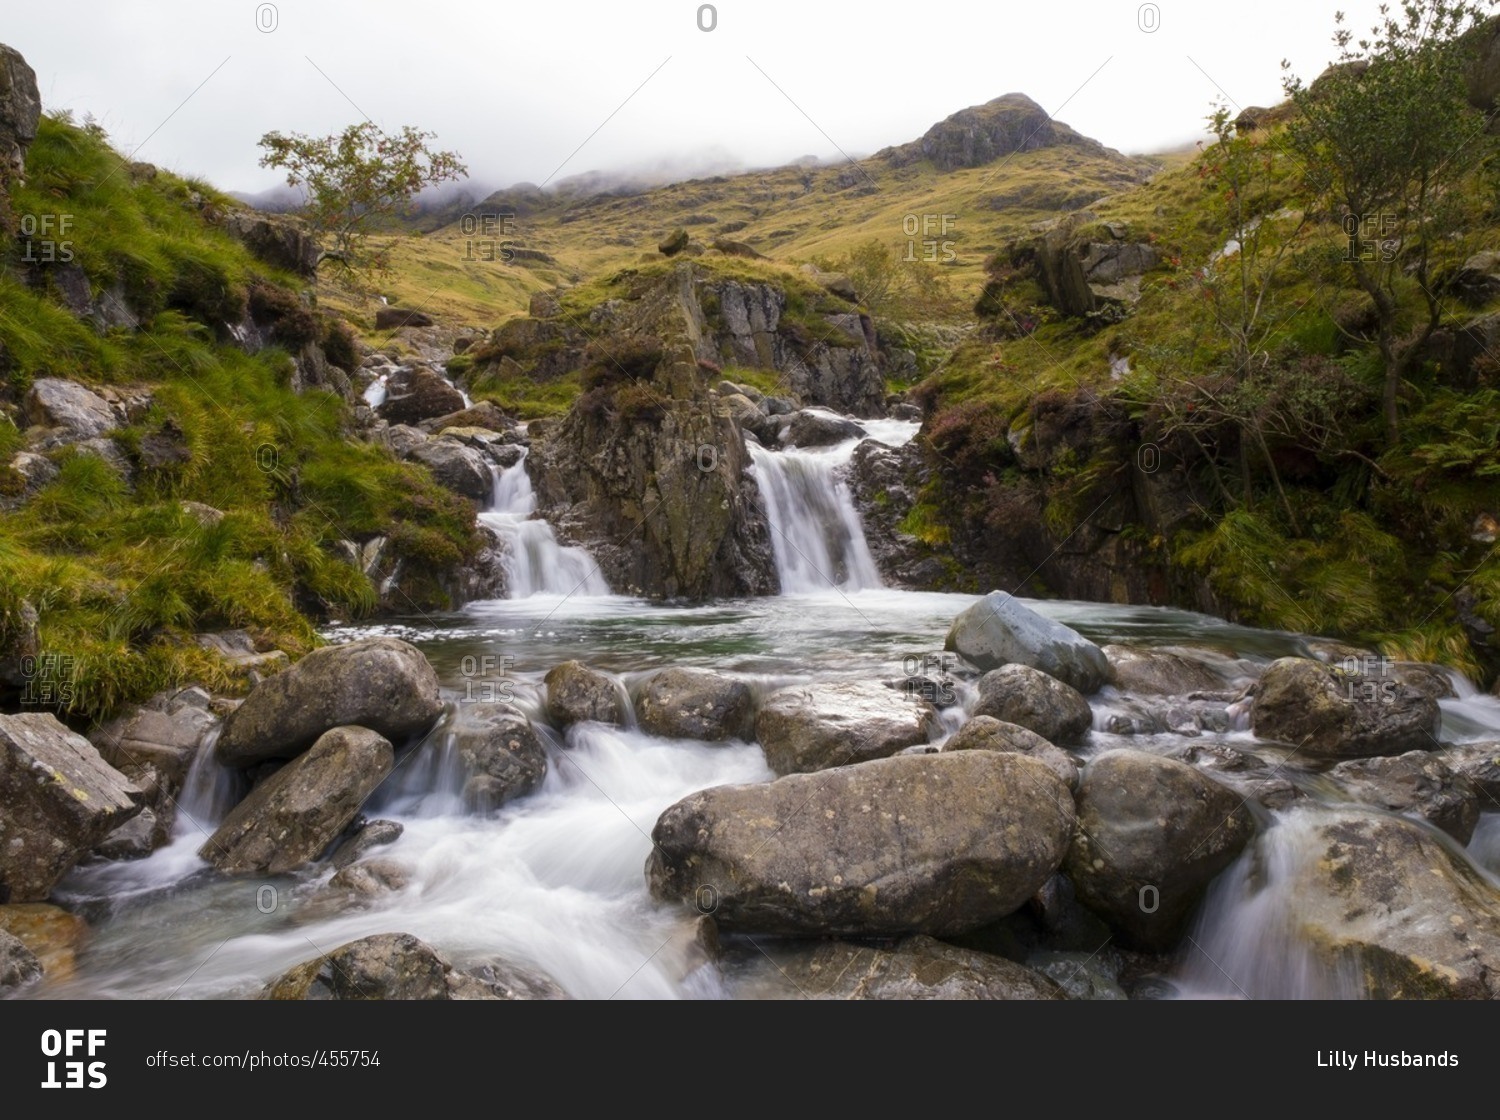 Waterfalls on a mountainside in Cumbria, England